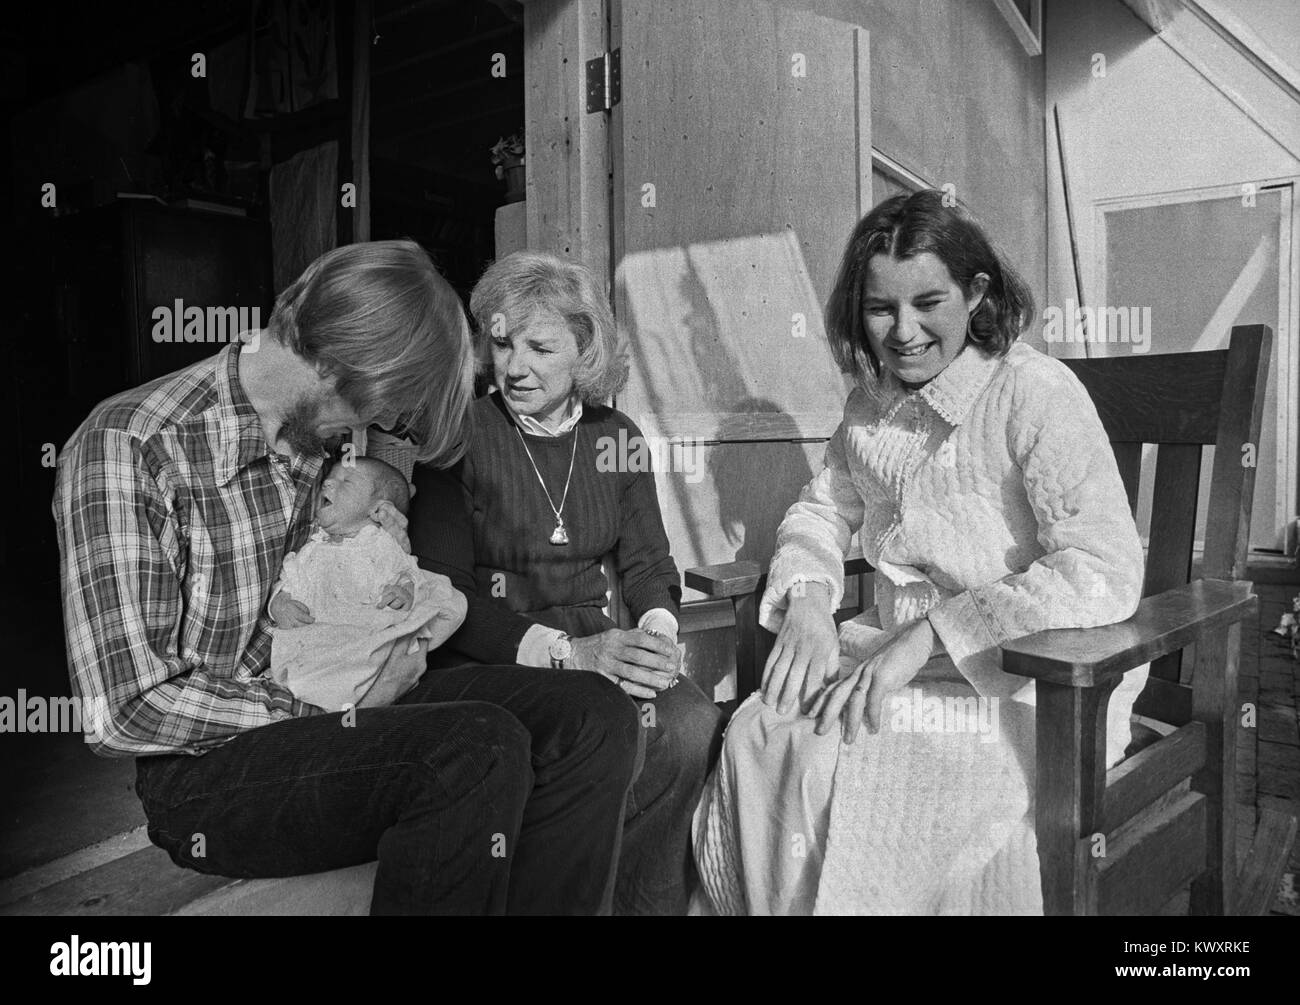 David Townsend (left), Ethel Kennedy (center), Kathleen Kennedy Townsend (right), and newborn baby Meaghan Anne Townsend, in 1977 in Santa Fe, New Mexico. Ethel Kennedy (wife of Robert Kennedy) was in Santa Fe visiting her daughter Kathleen. Stock Photo